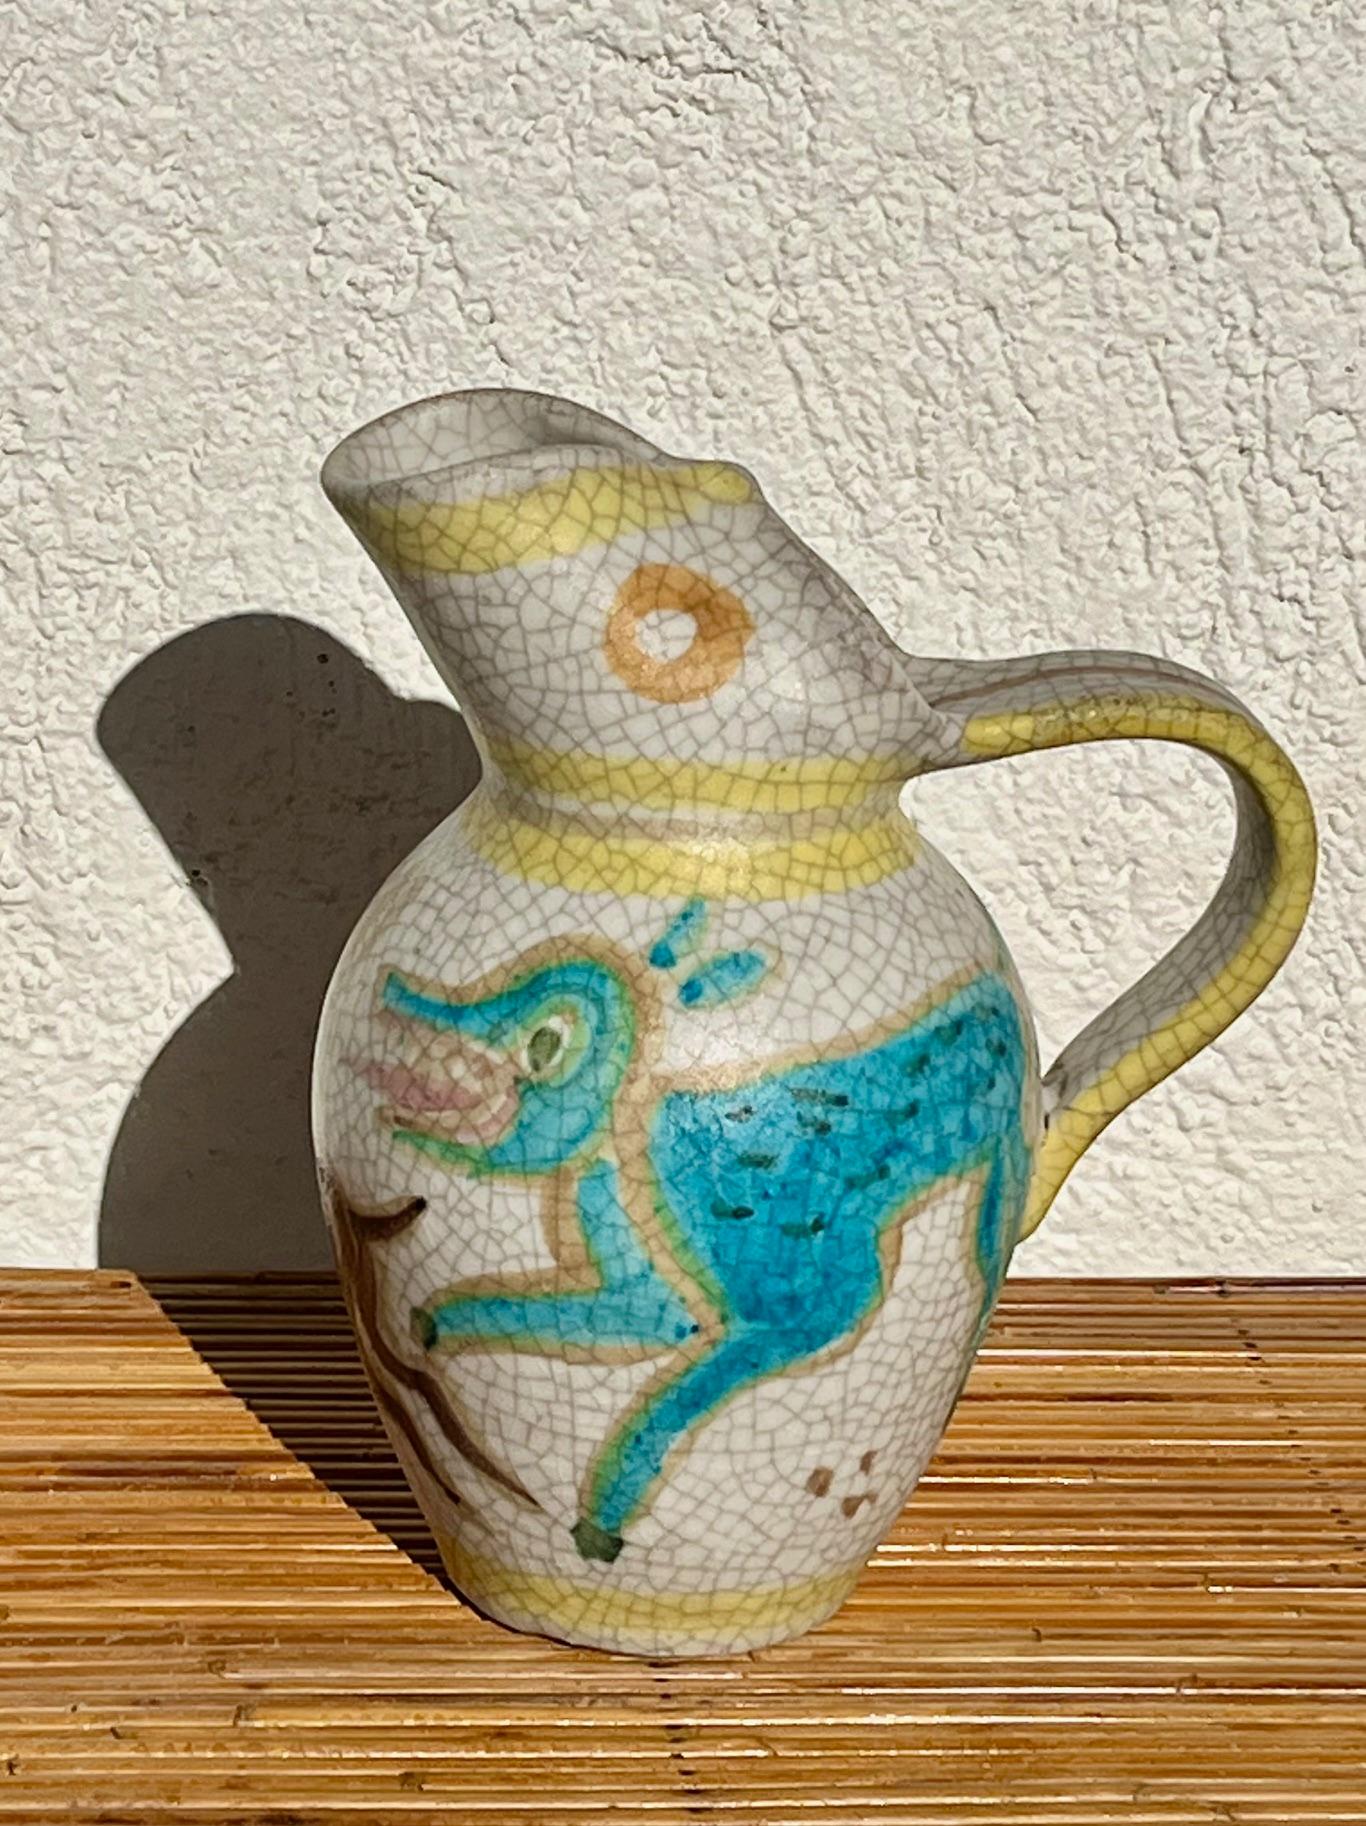 Beautiful ceramic pitcher by Guido Gambone. 
Rare decoration on the body of the pitcher depicting 2 running hounds, one blue, the other brown, on light background.
Glazed and cracked ceramic. 
Signed Gambone Italy, with donkey mark. 

Guido Gambone